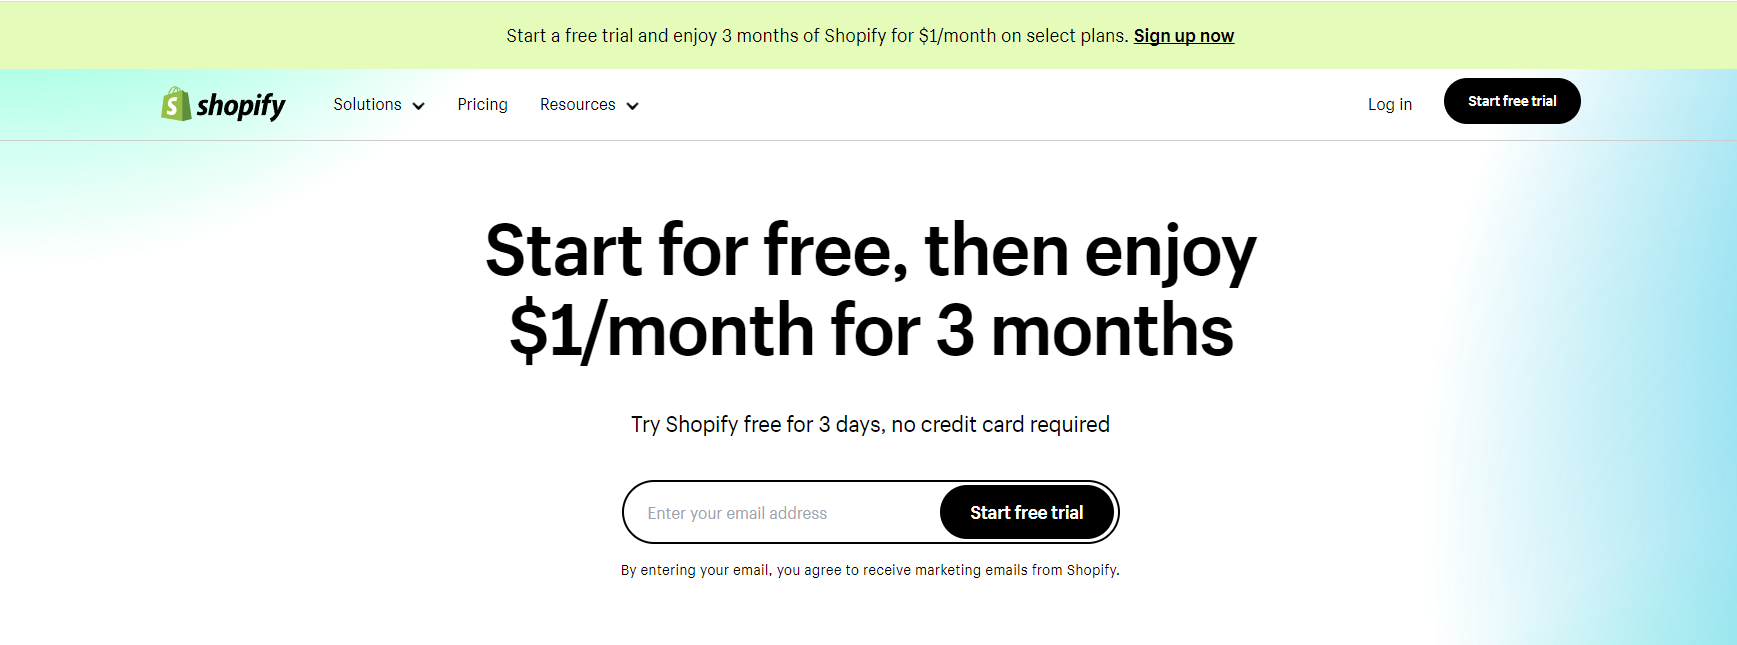 Shopify Start for free, enjoy $1/month for months